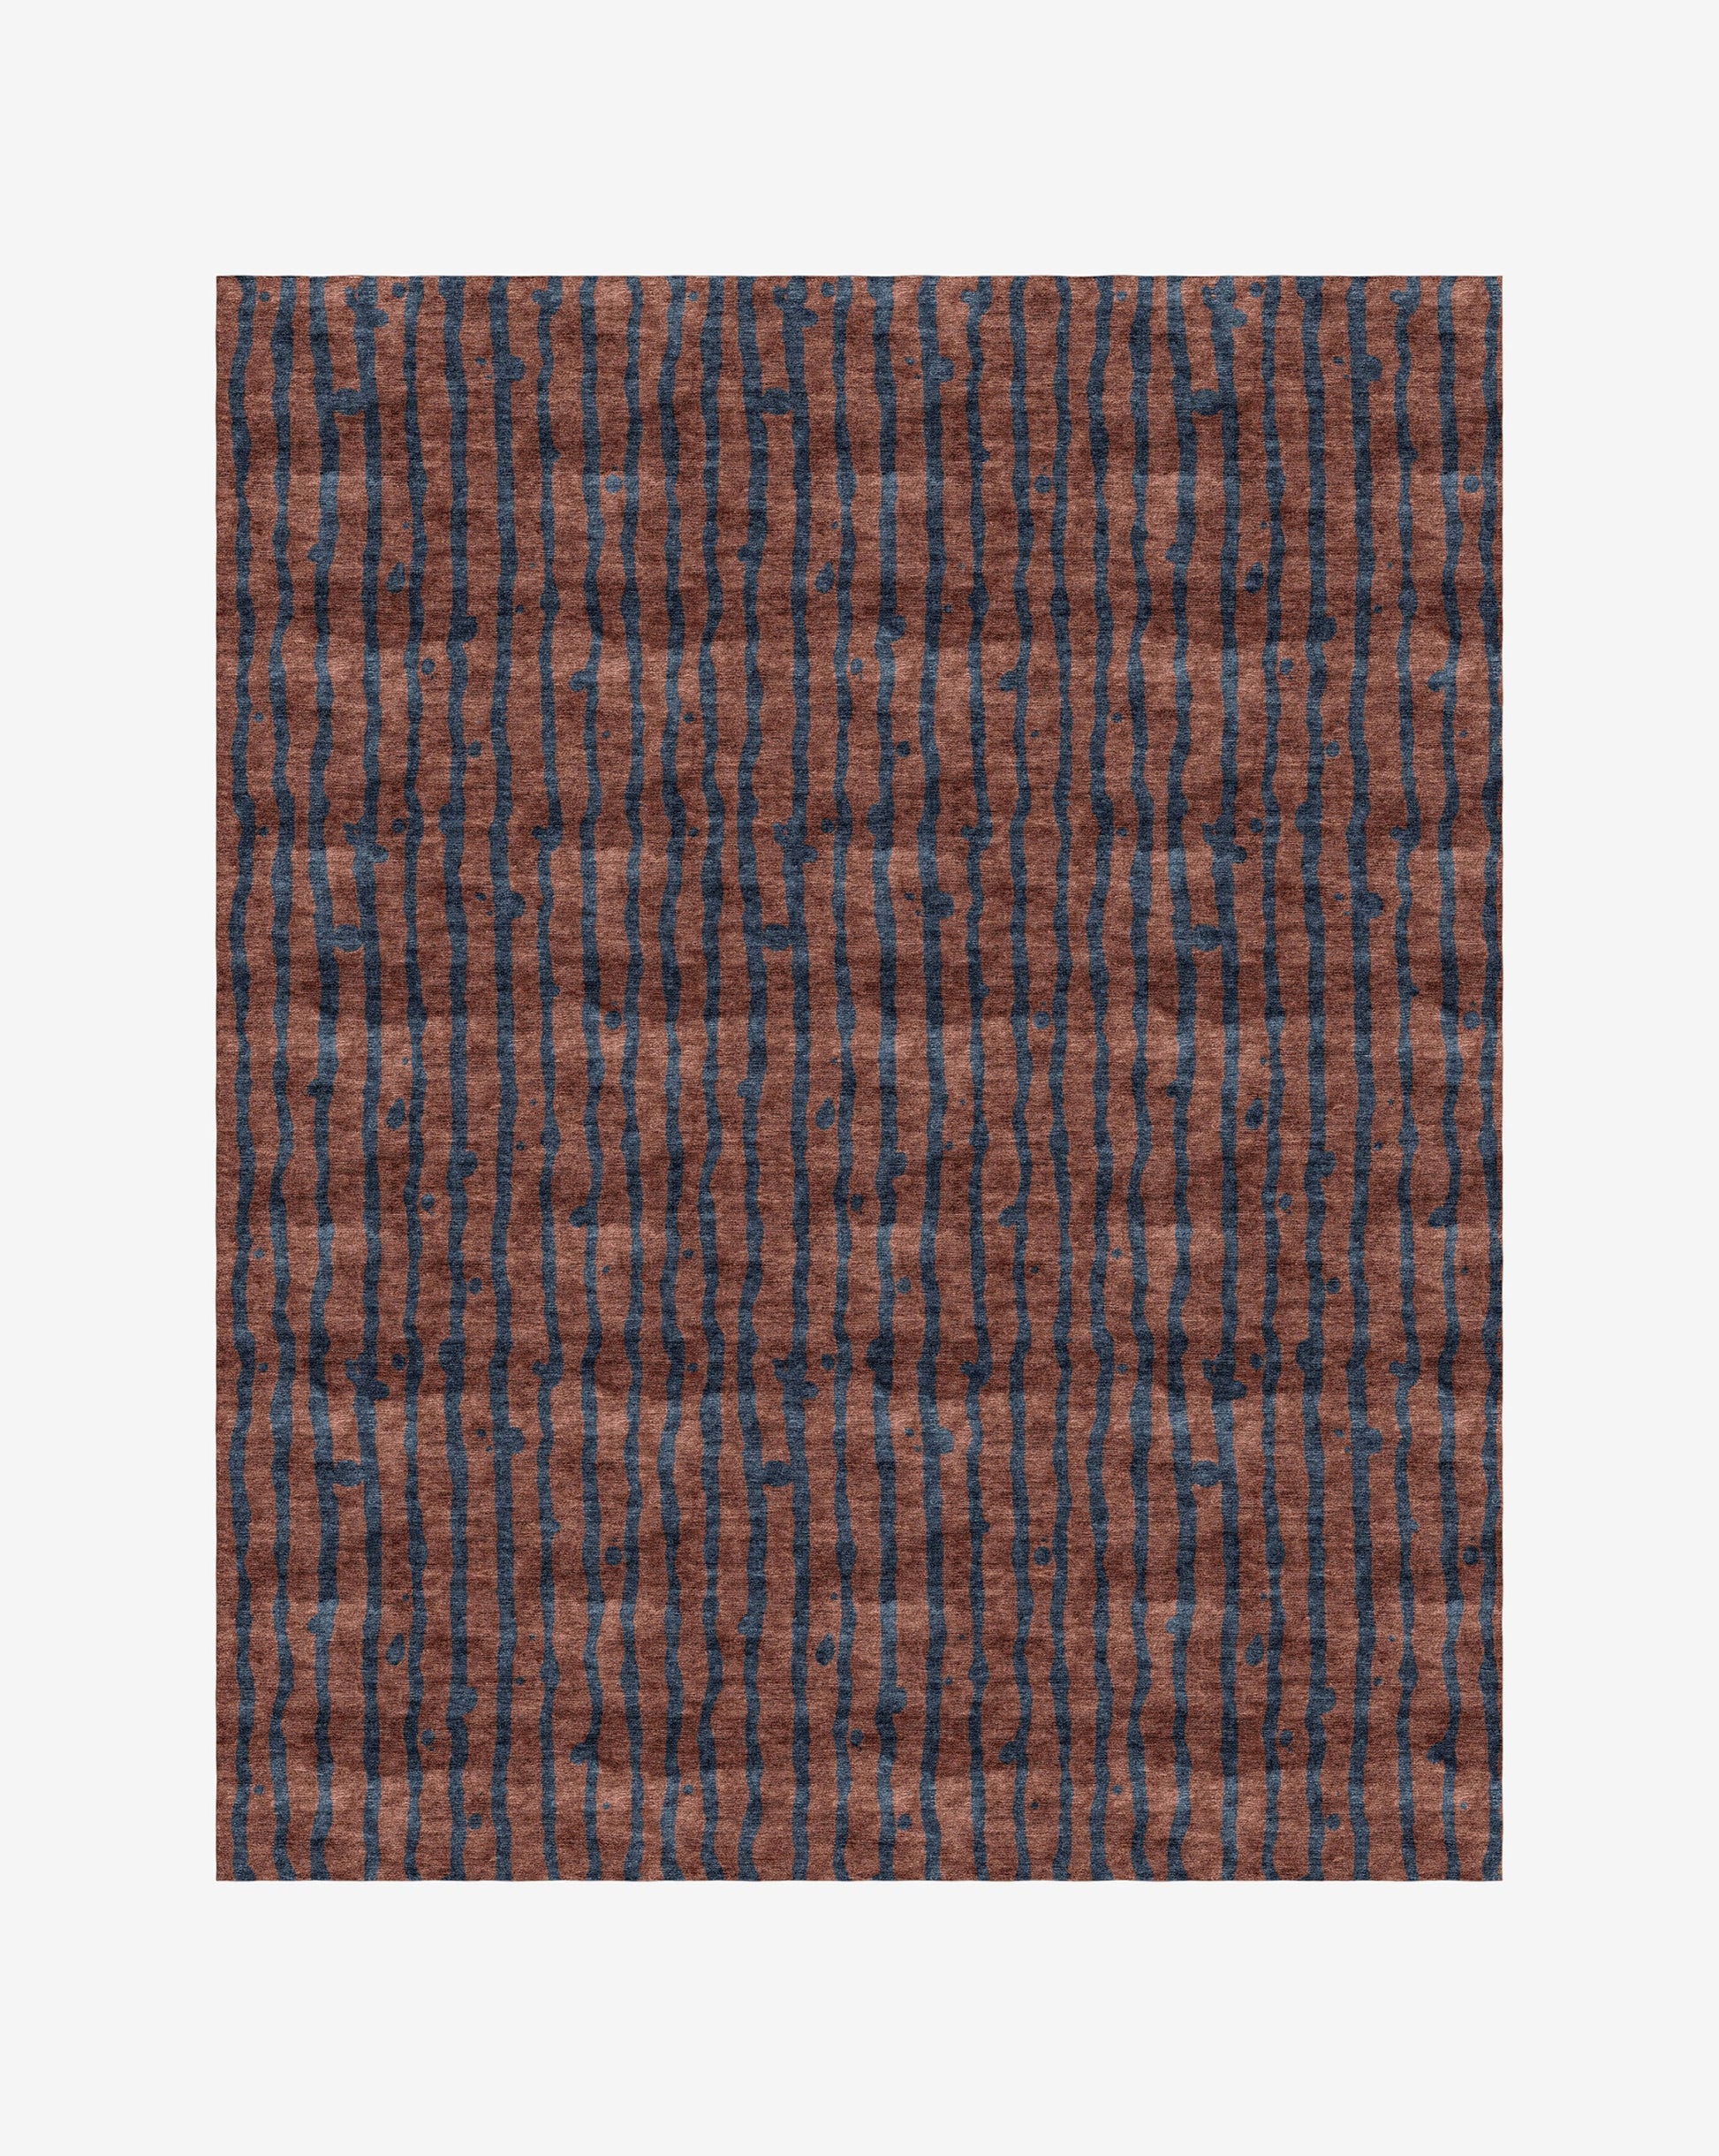 A Drippy Stripe Hand Knotted Rug Isthmus with a bold blue pattern